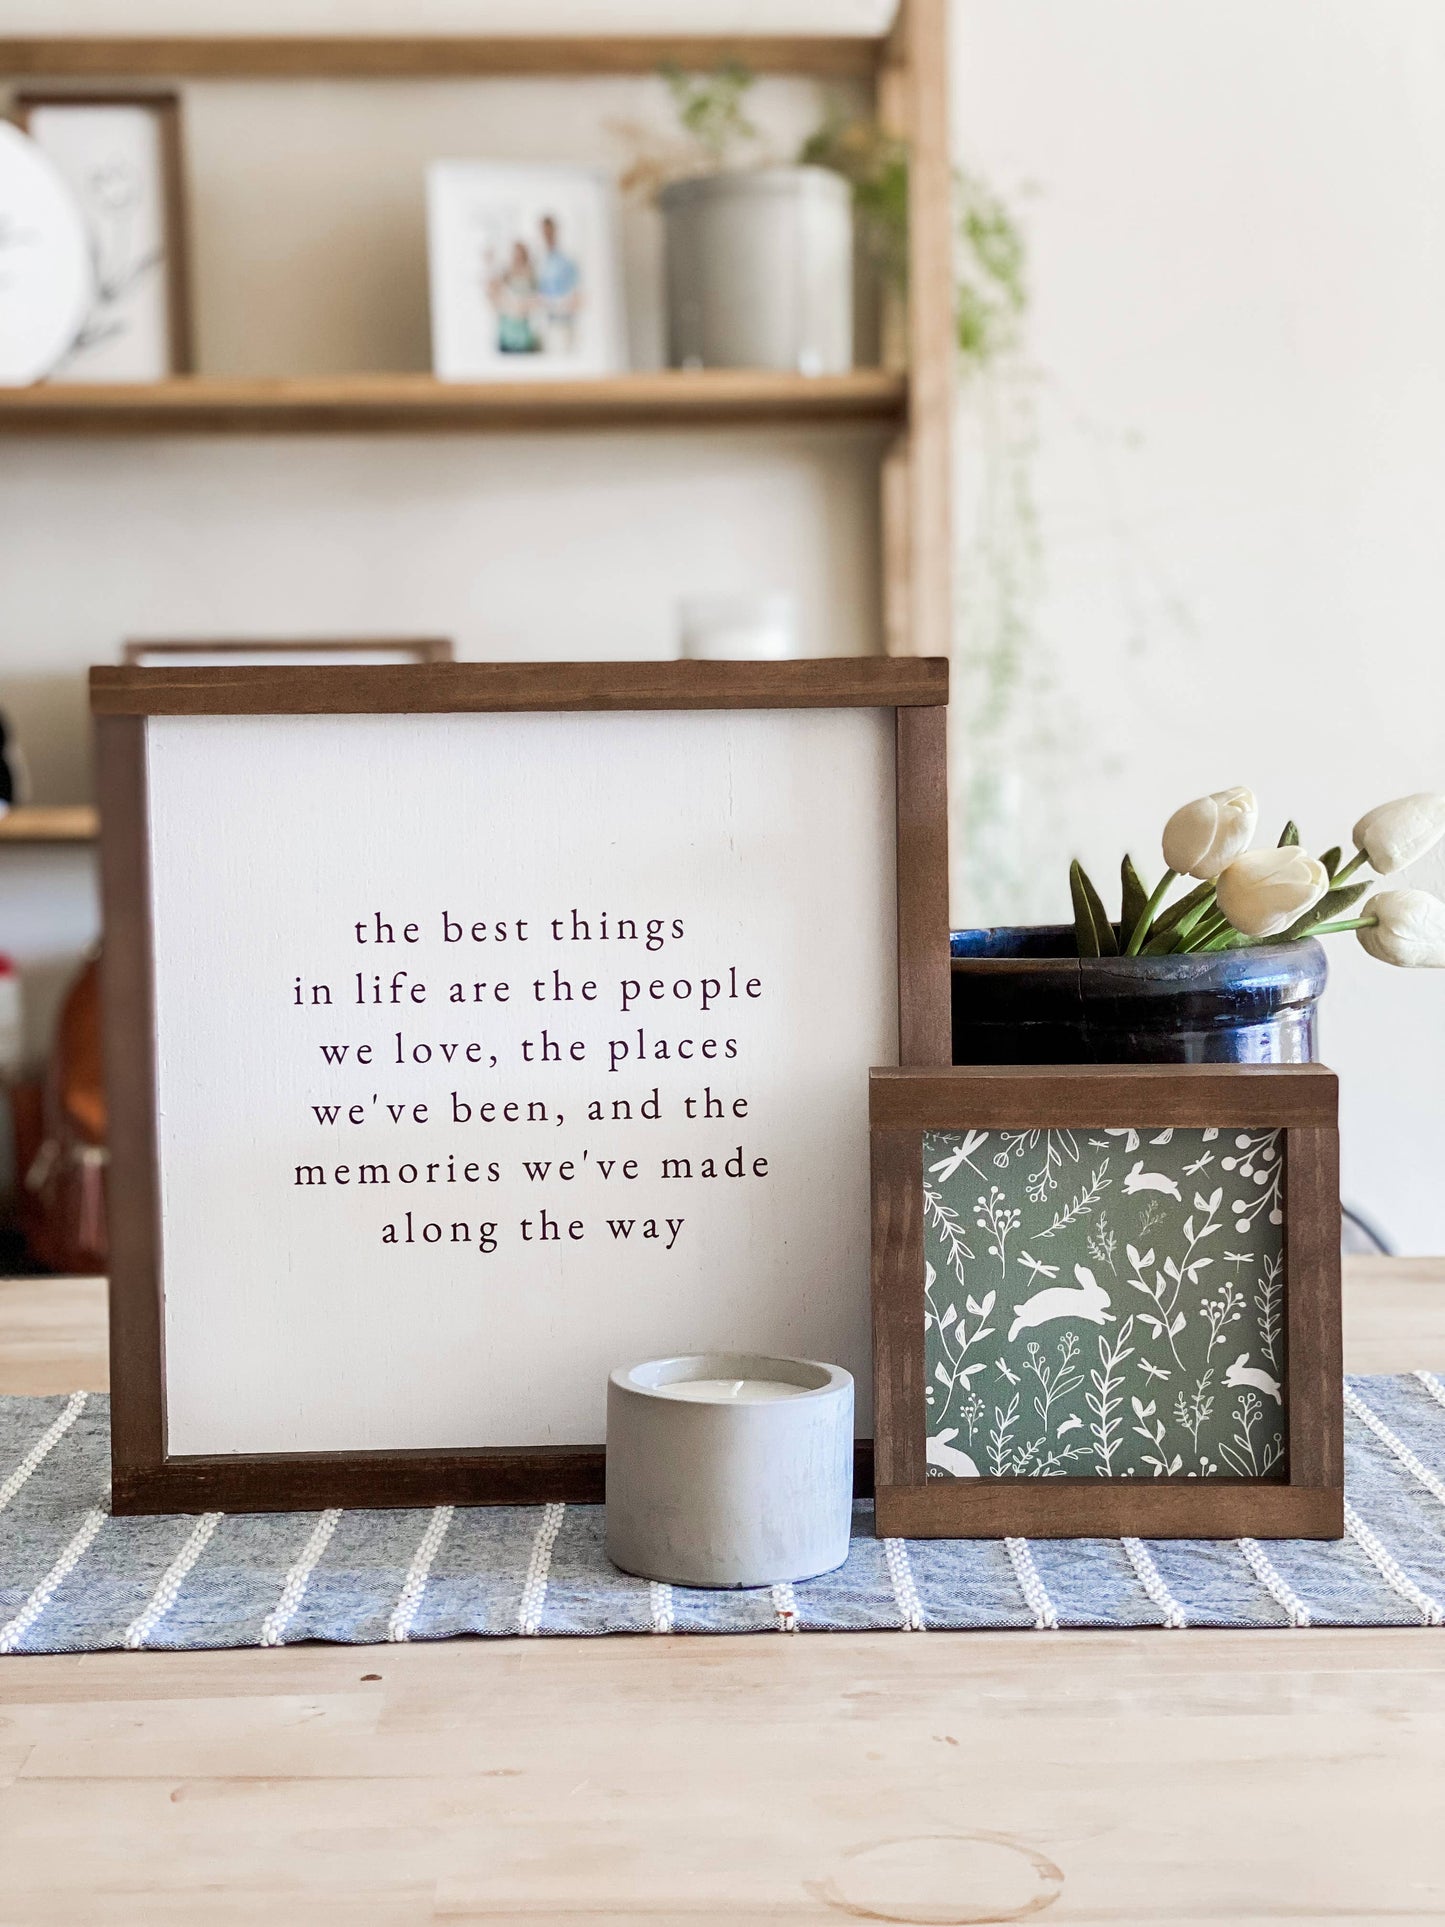 The Best Things In Life | Handmade Wood Sign: White / 25x25"